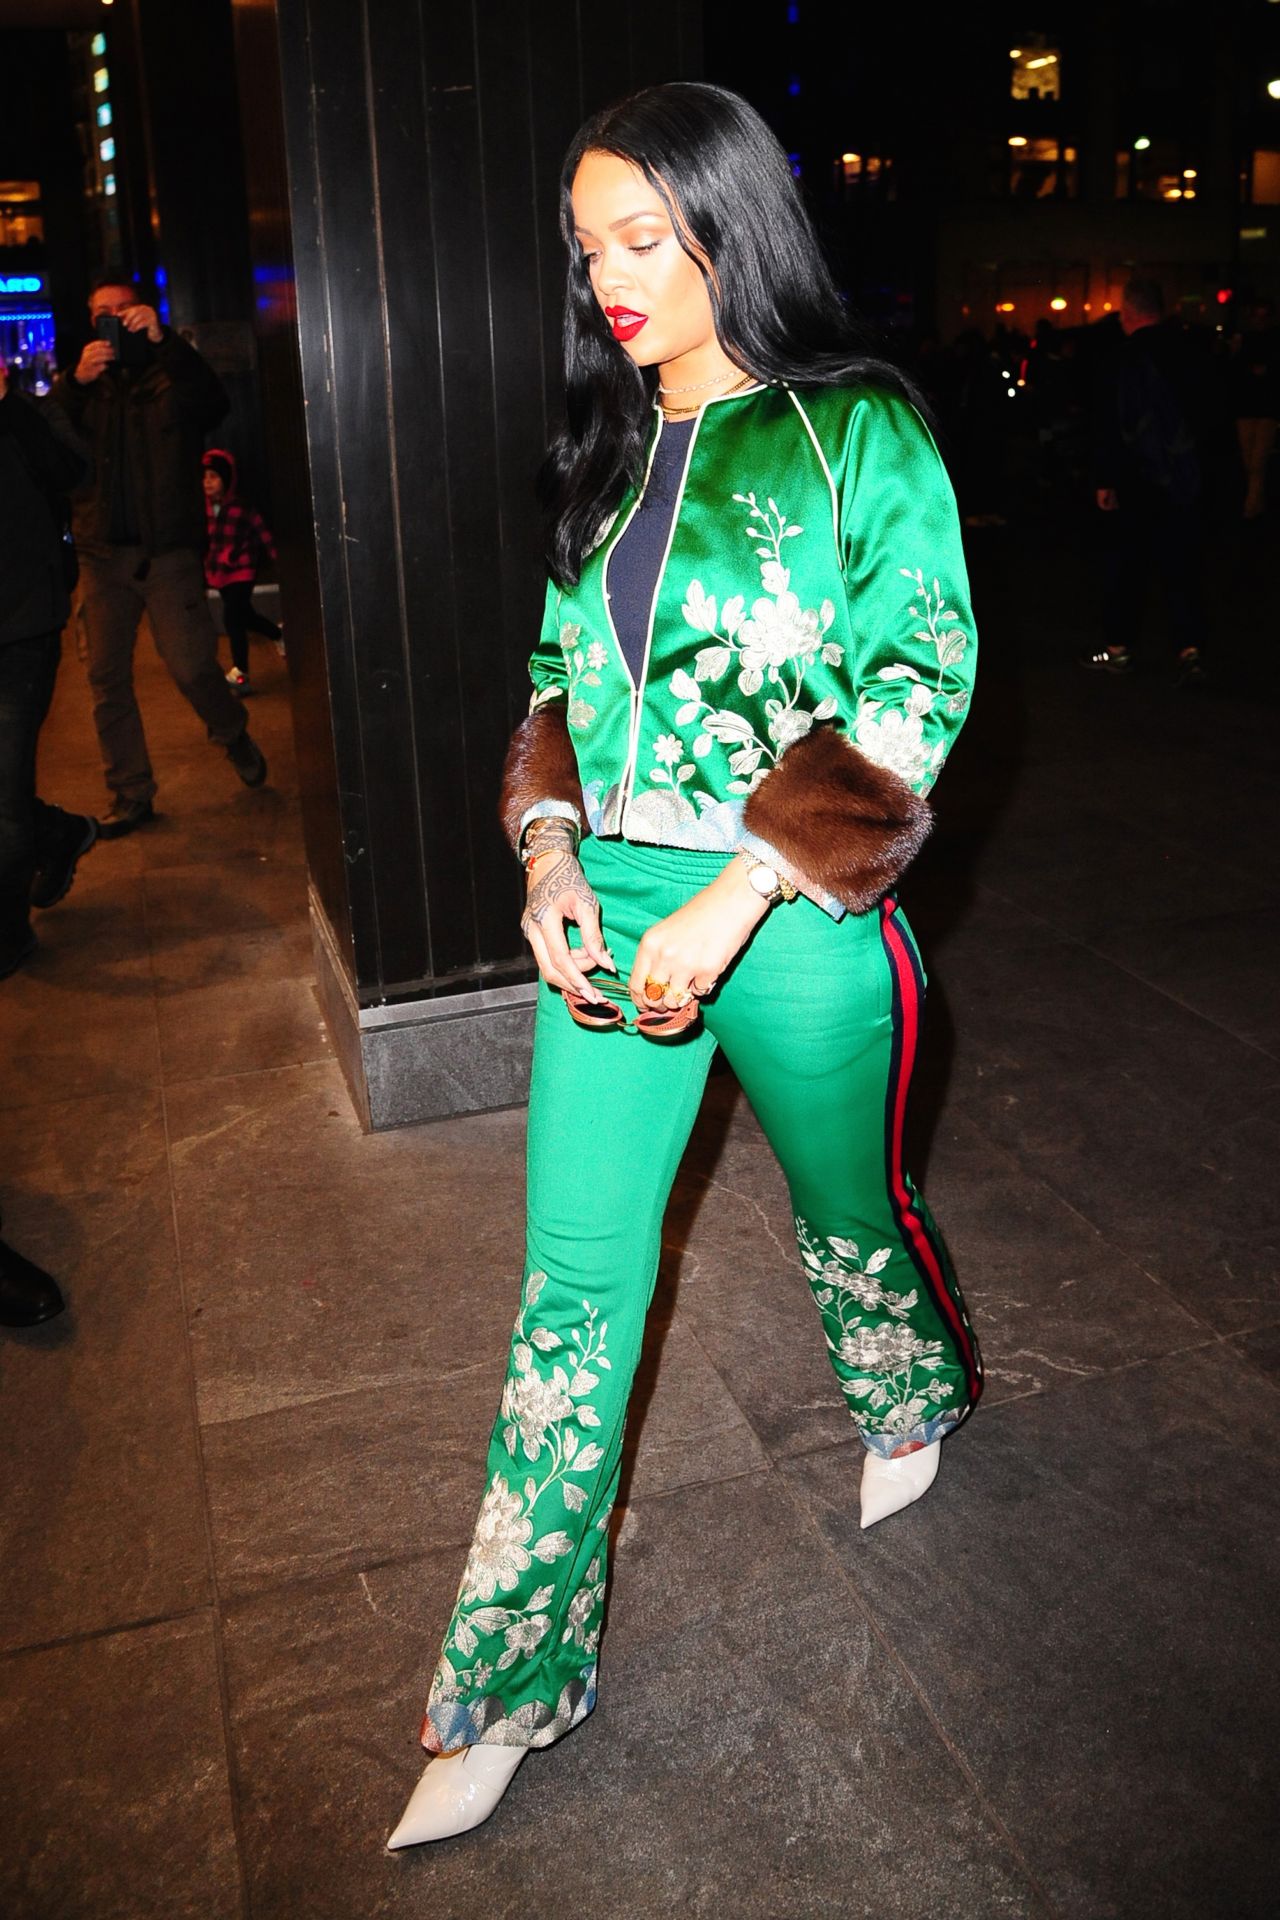 rihanna-looks-great-in-green-out-in-new-york-city-3-28-2016-15